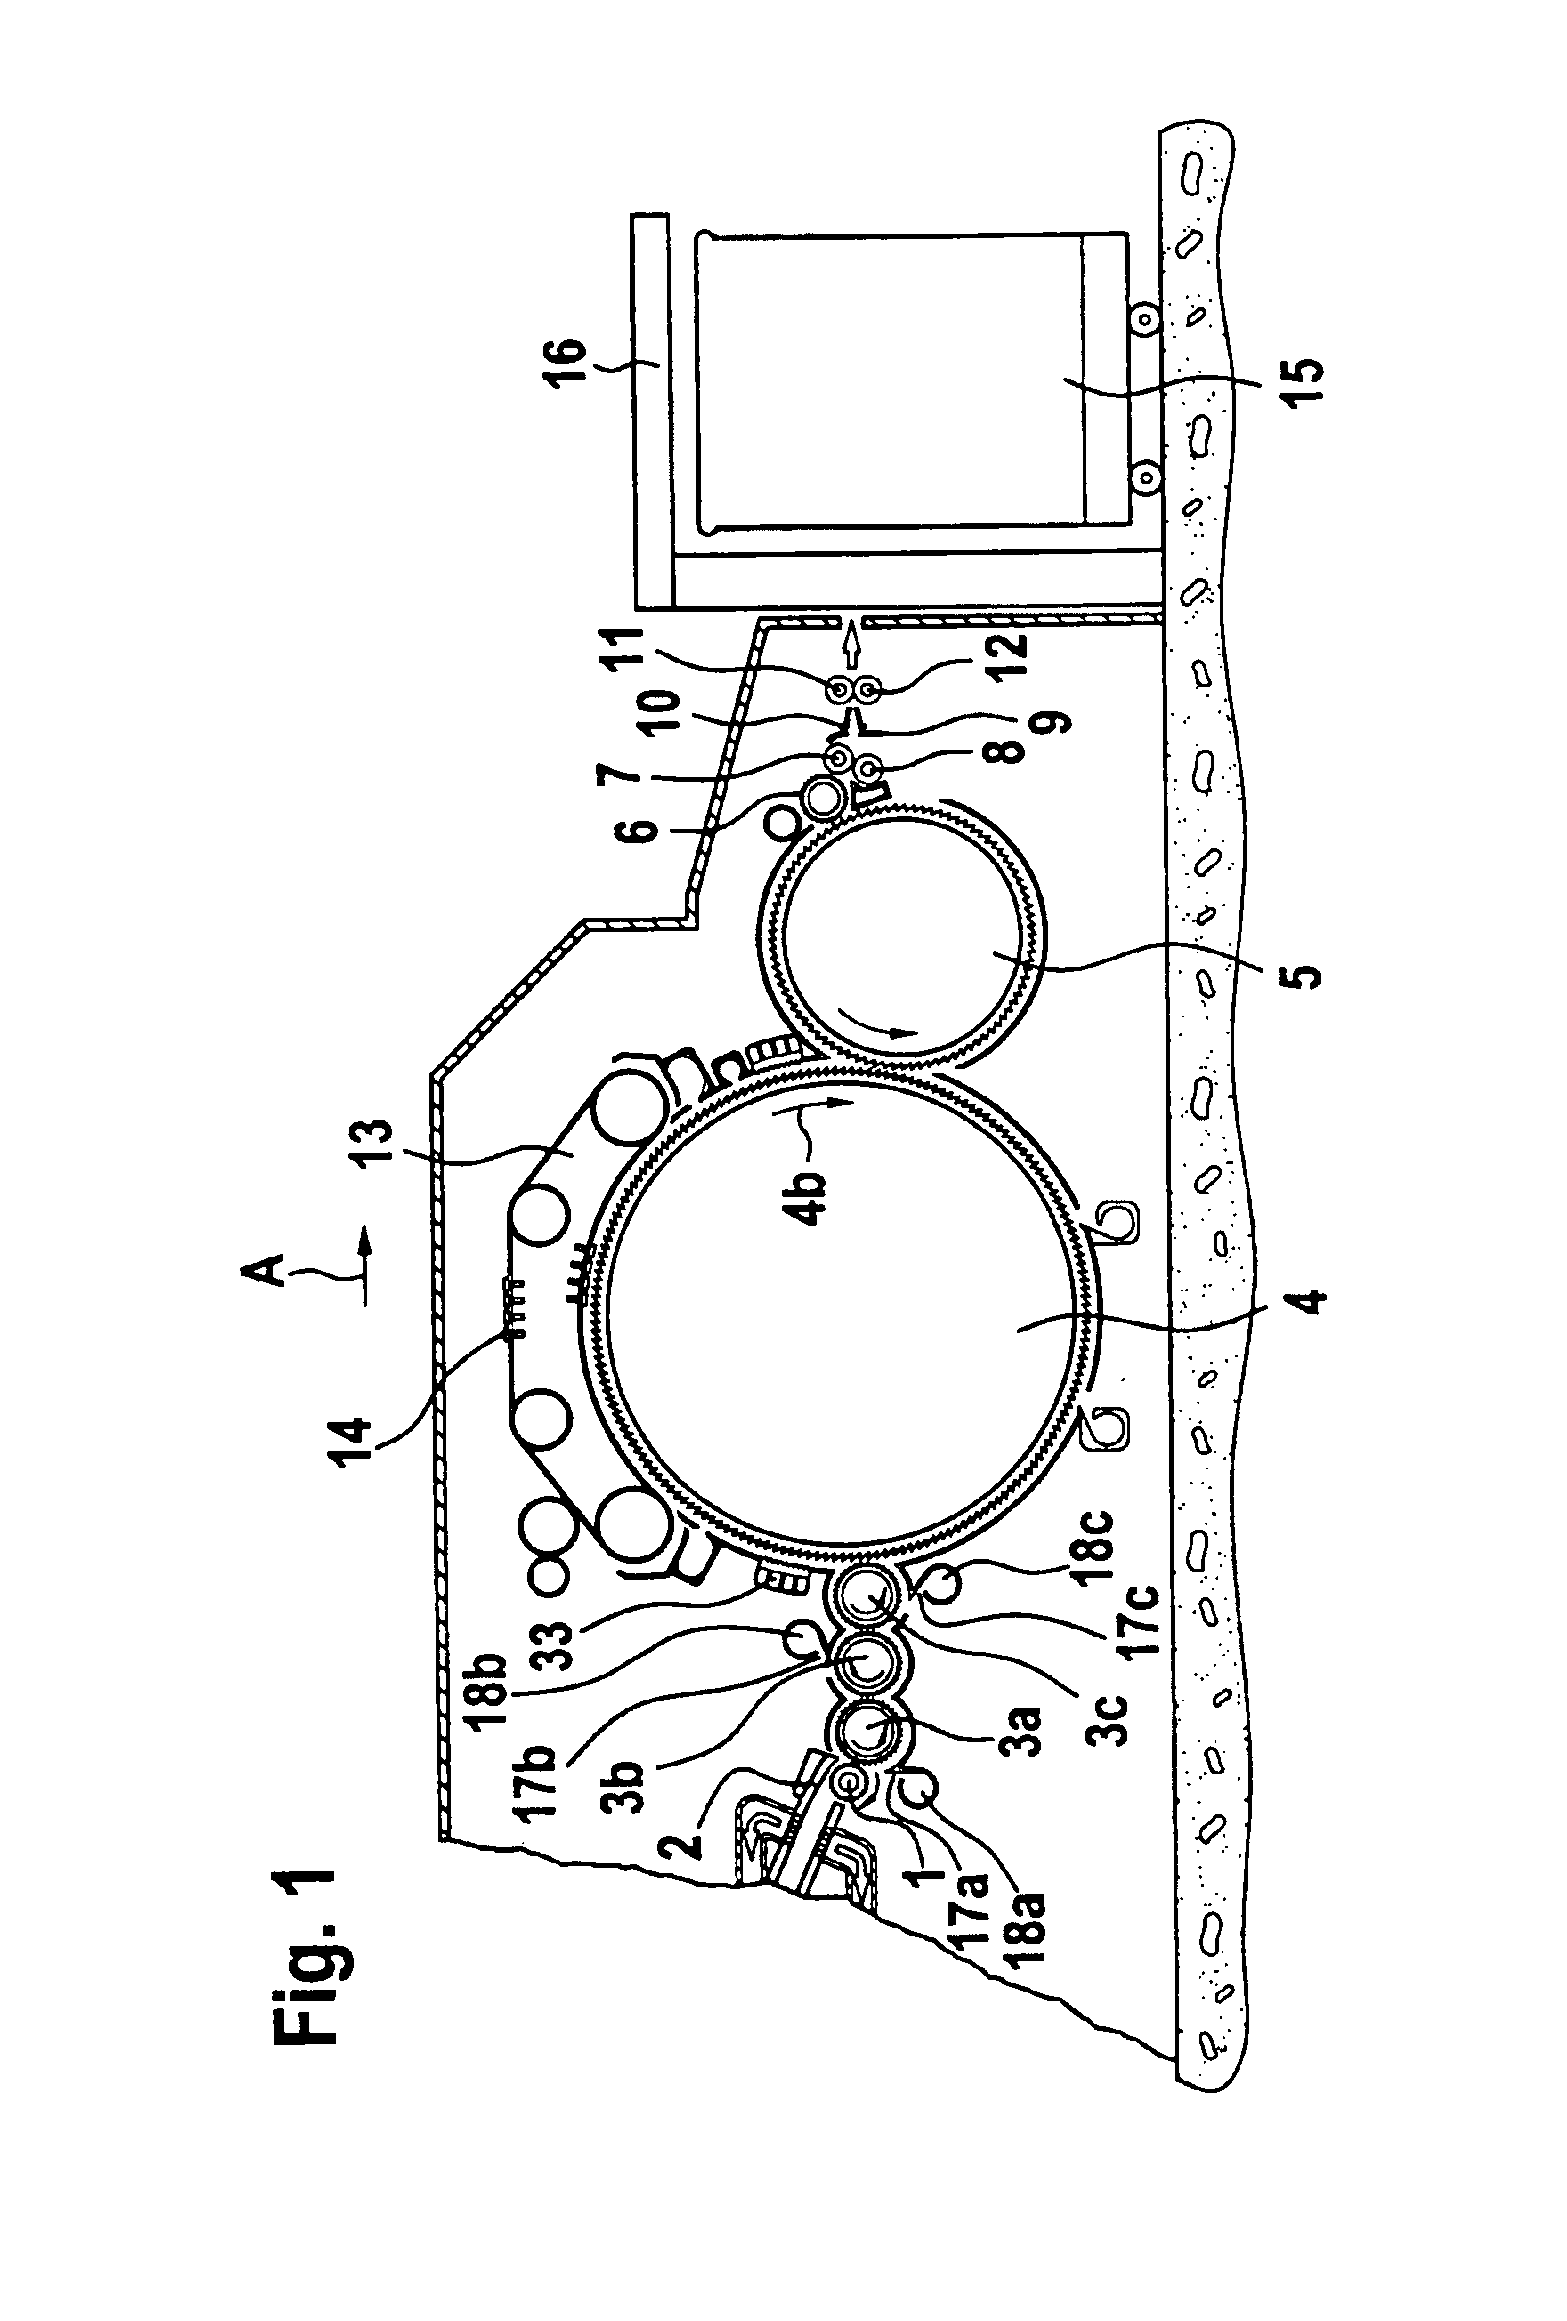 Separating device for a textile processing machine